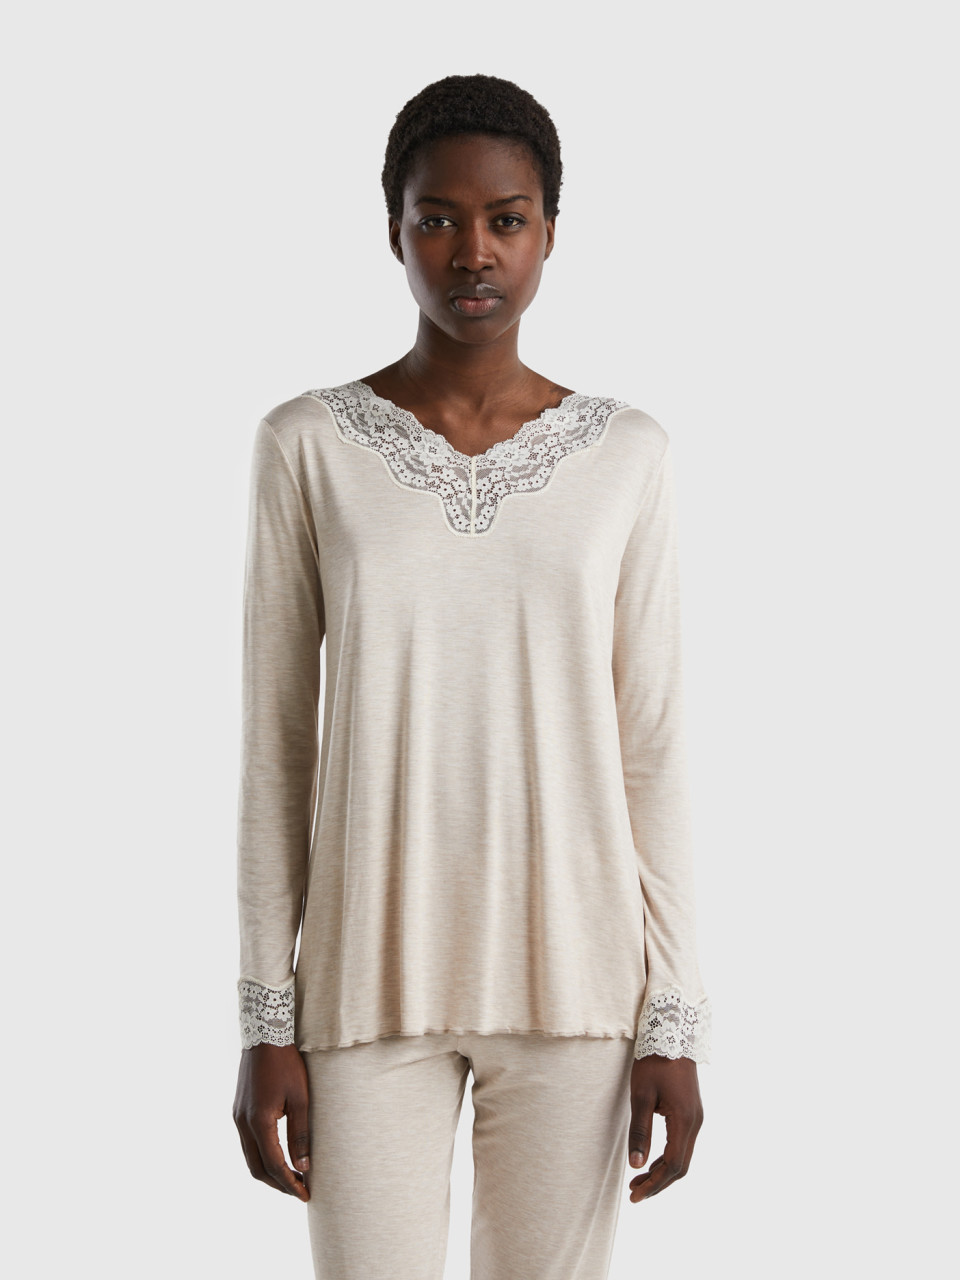 Benetton, Top With Lace Detail, Beige, Women